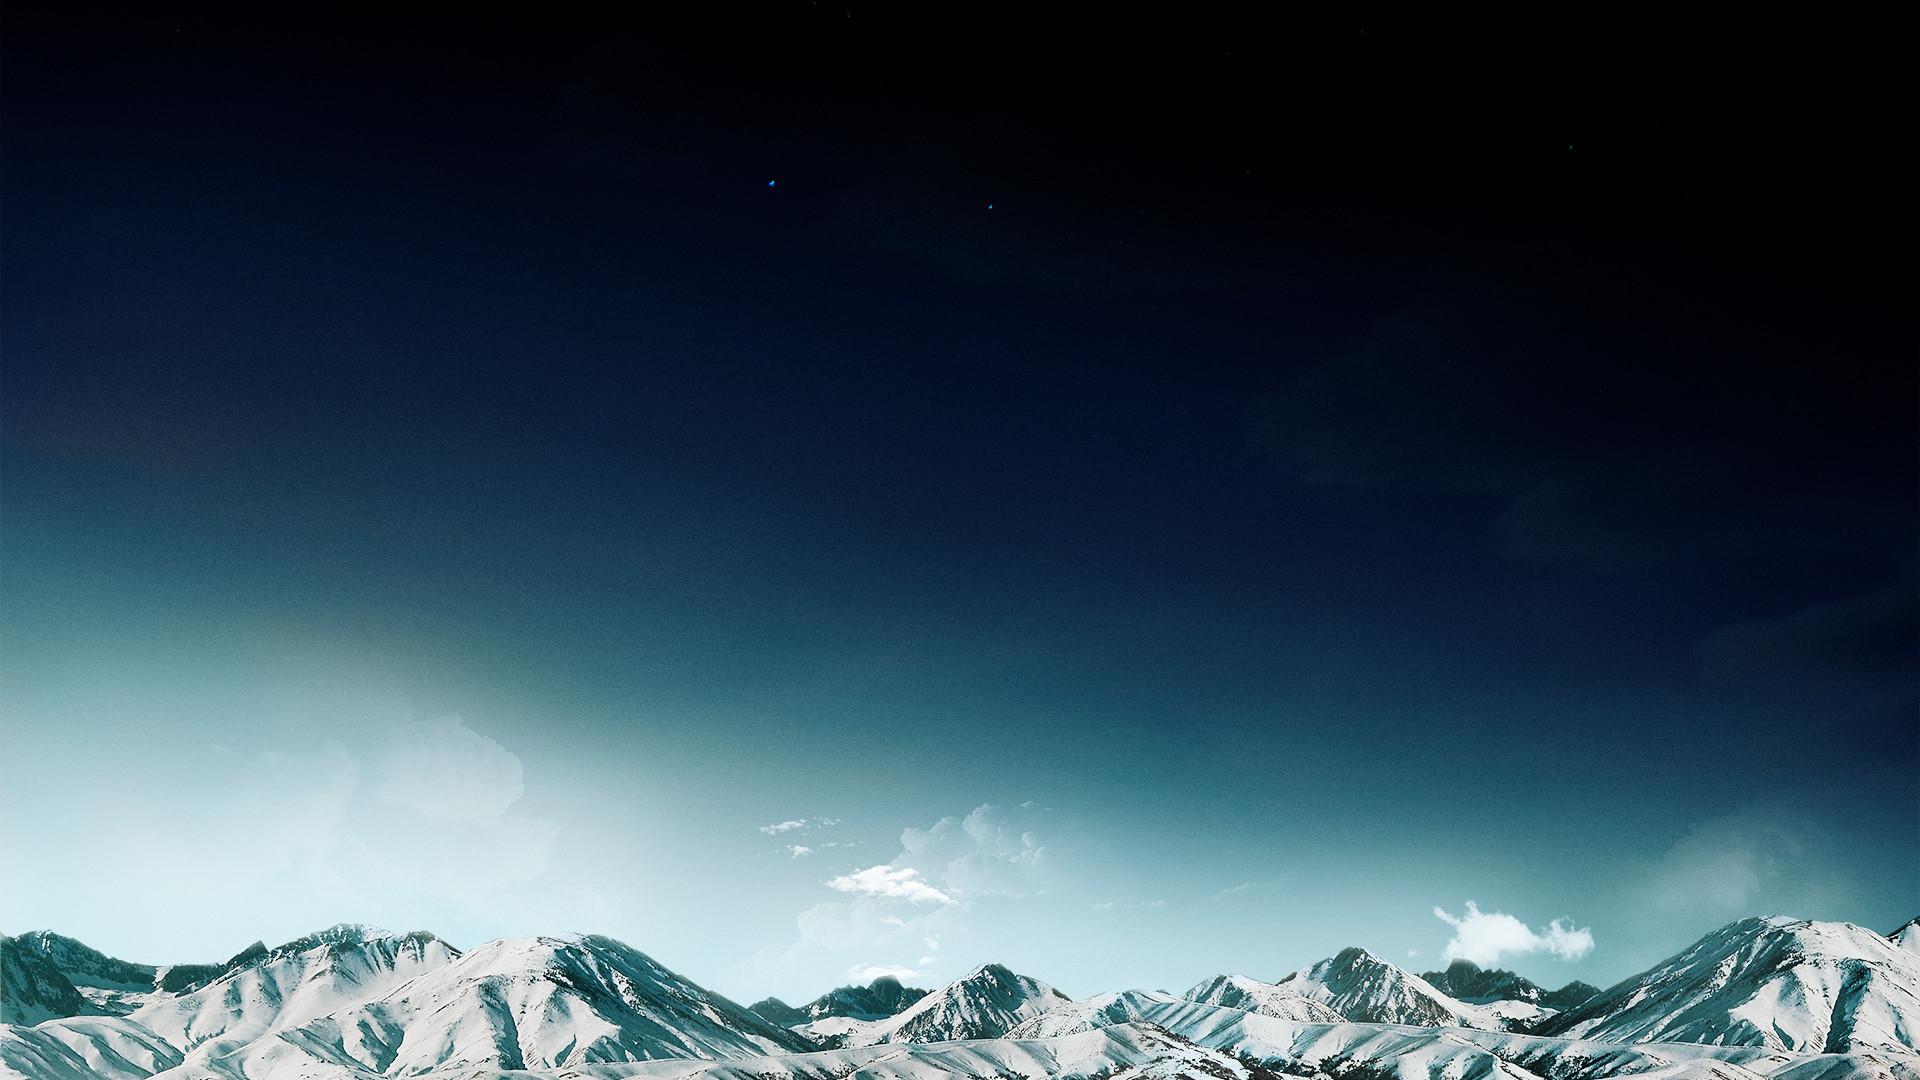 Download The Wallpapers From This Set Compiled Into - Snowy Mountain - HD Wallpaper 